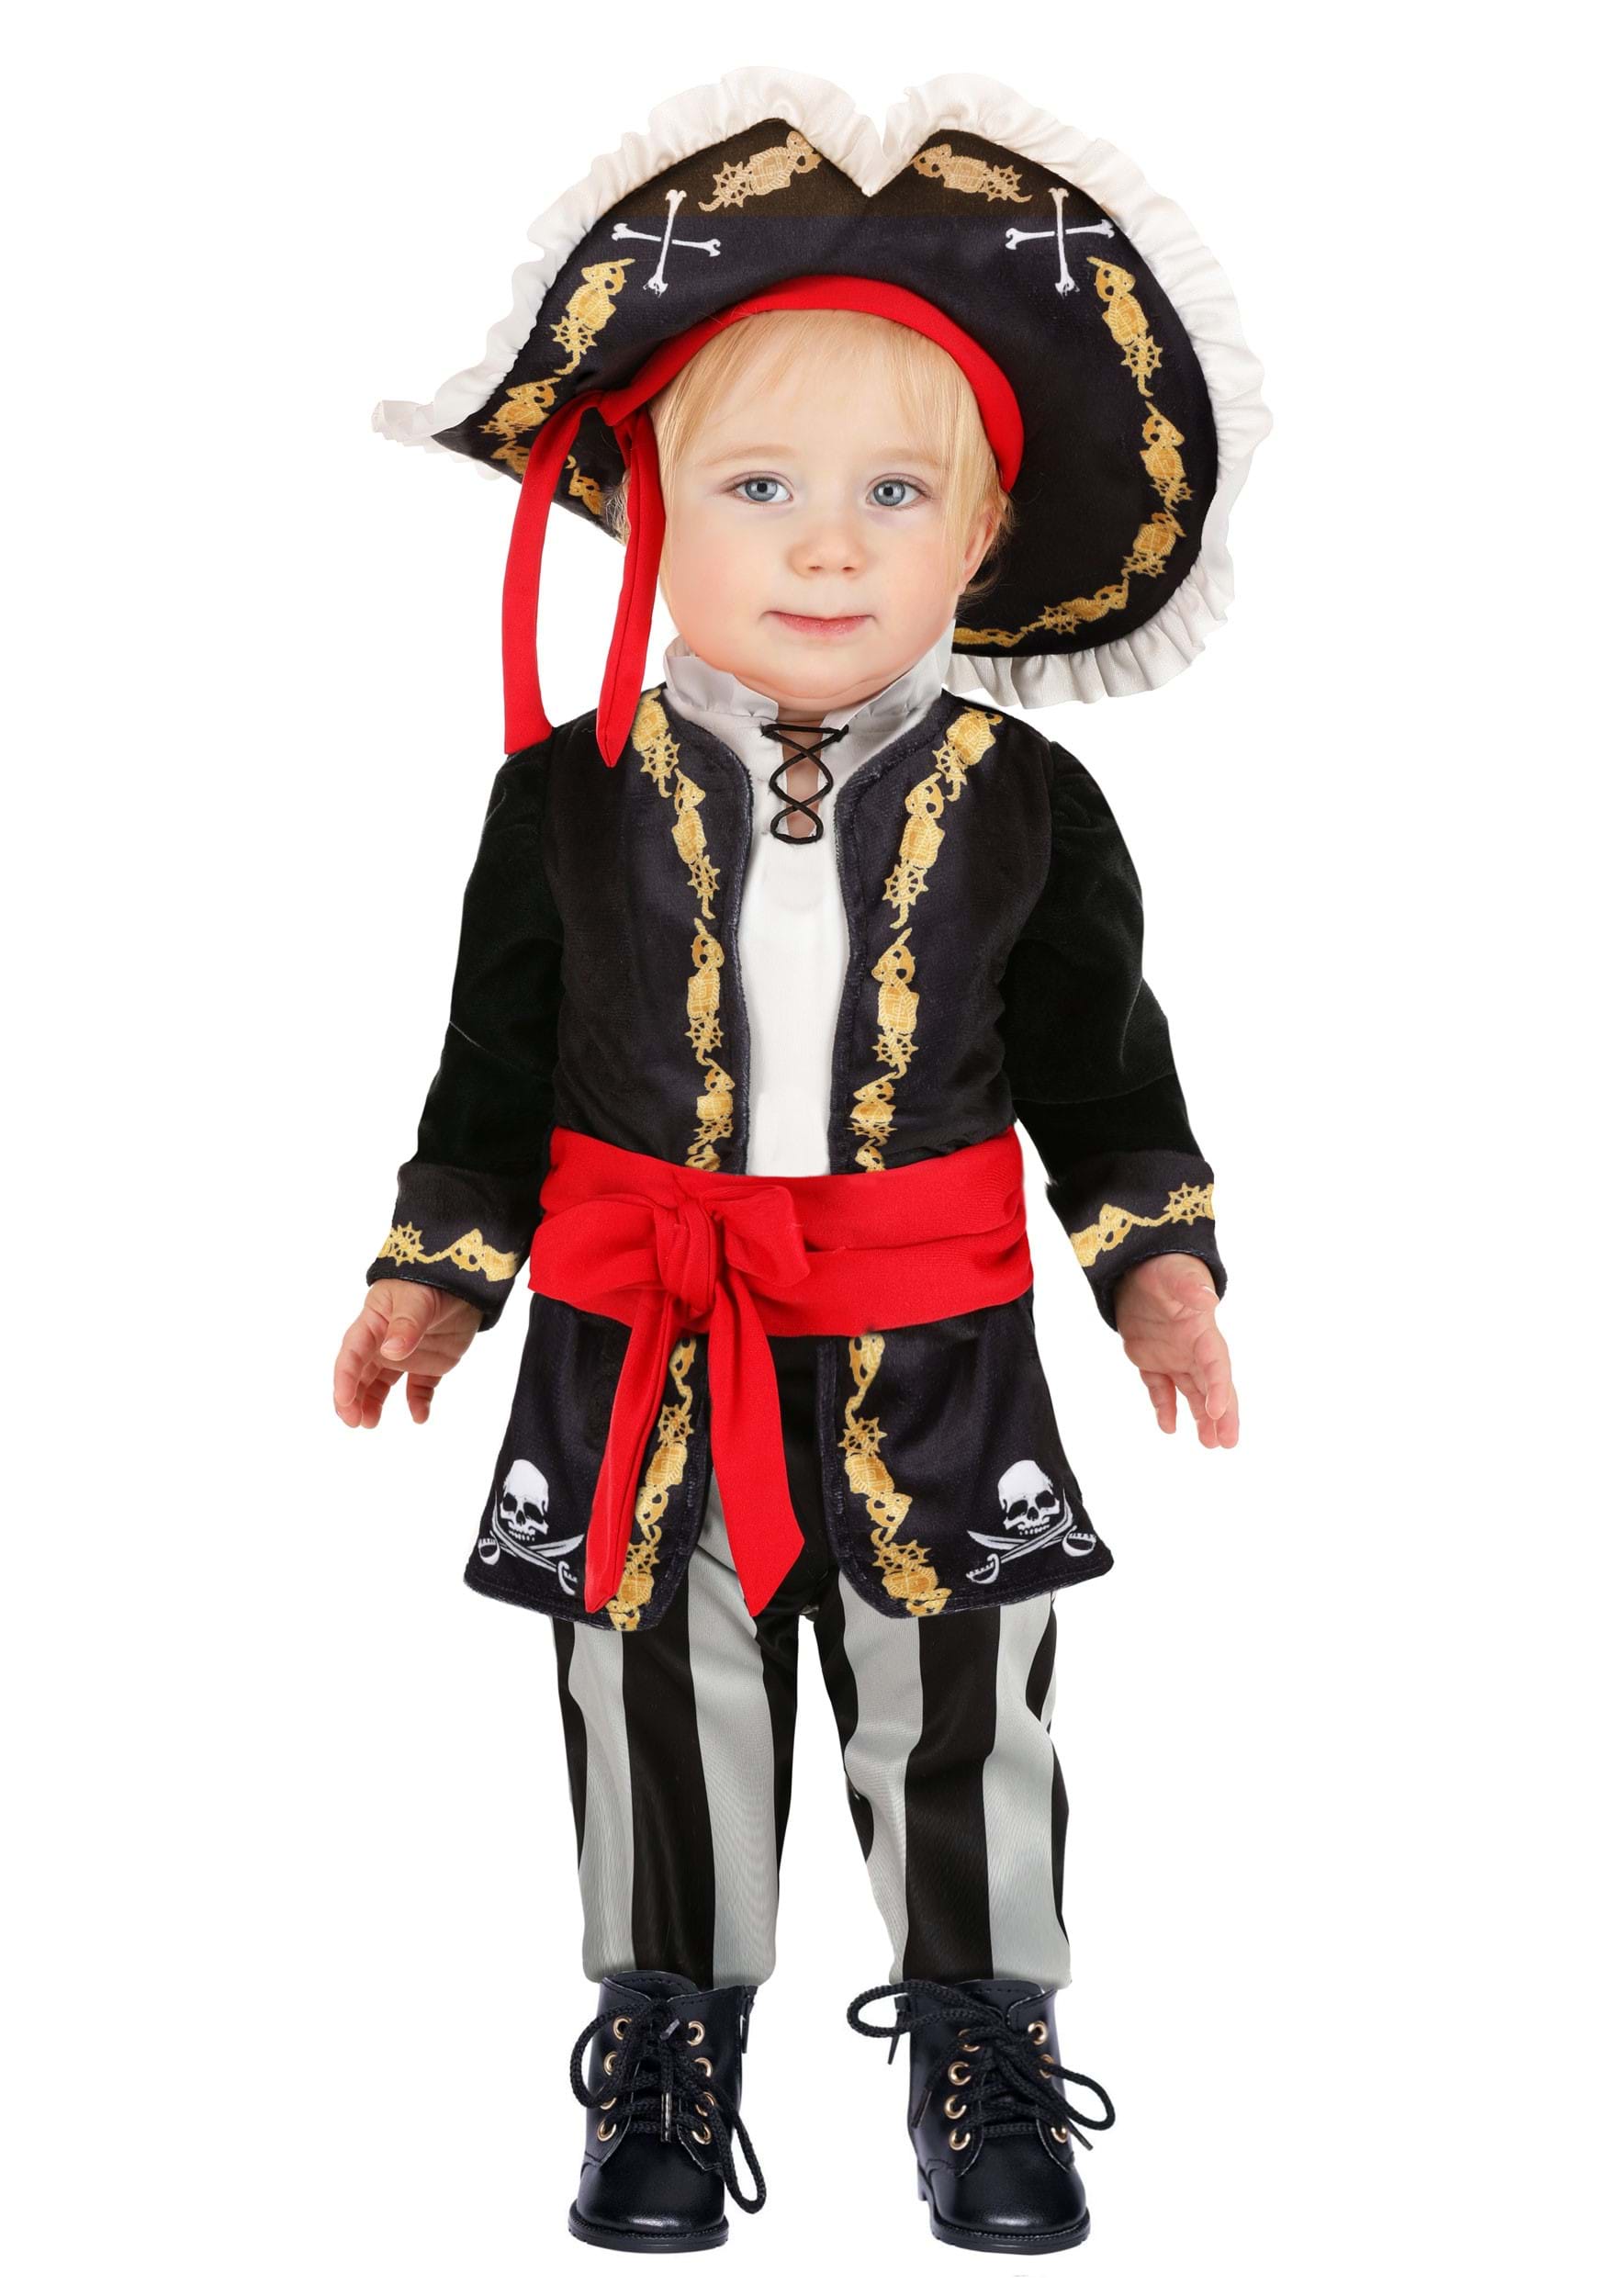 Pirate Captain Infant Costume | Infant Pirate Costumes